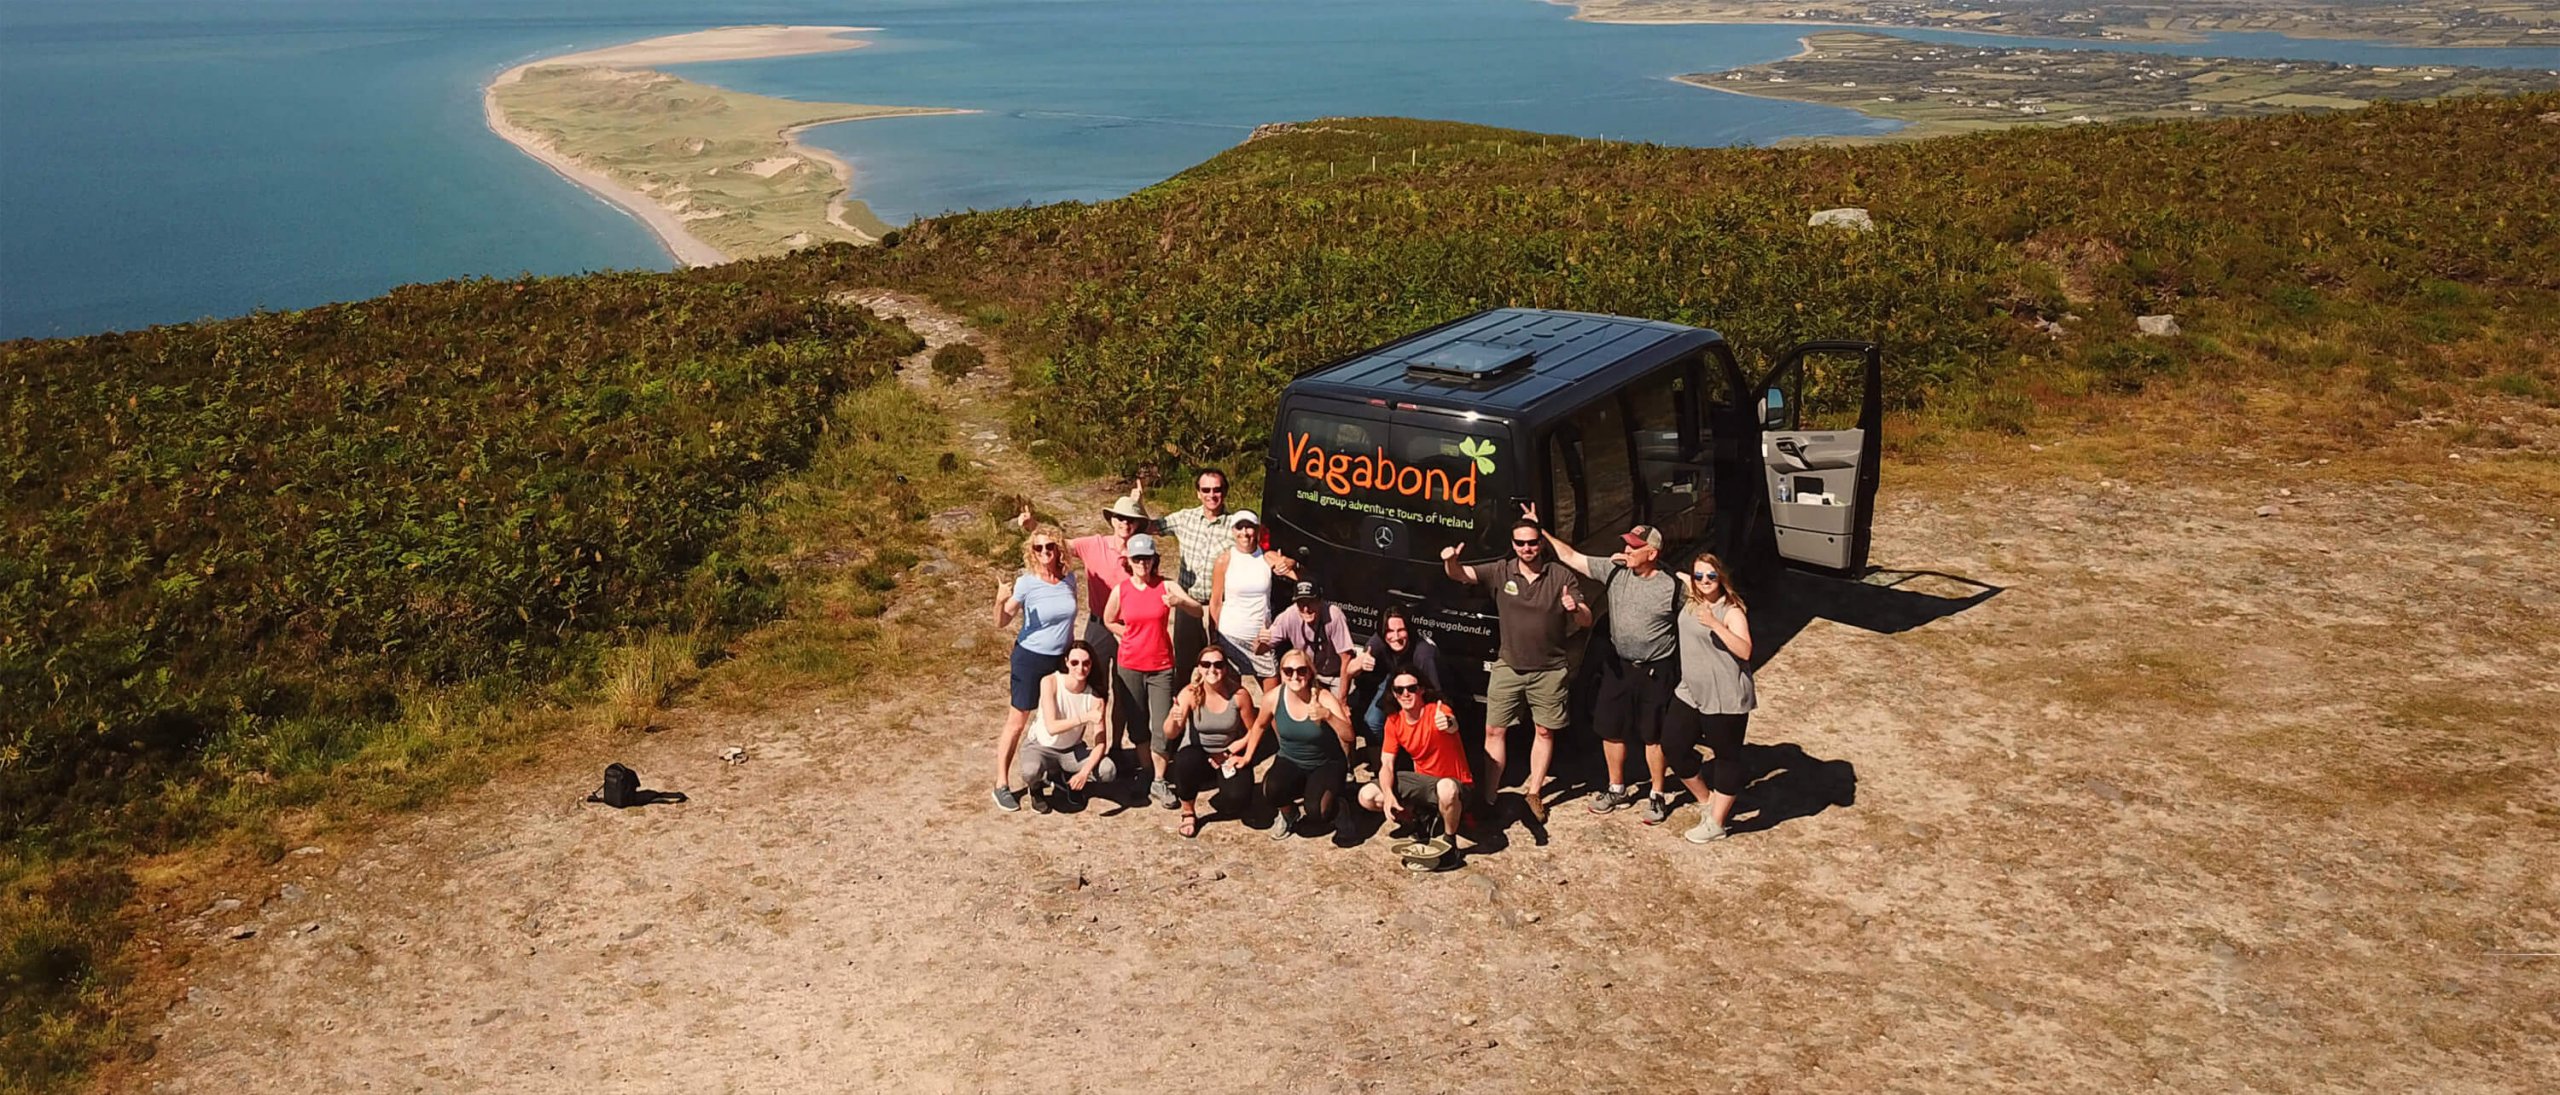 Ireland Tour group in a scenic landscape in Kerry